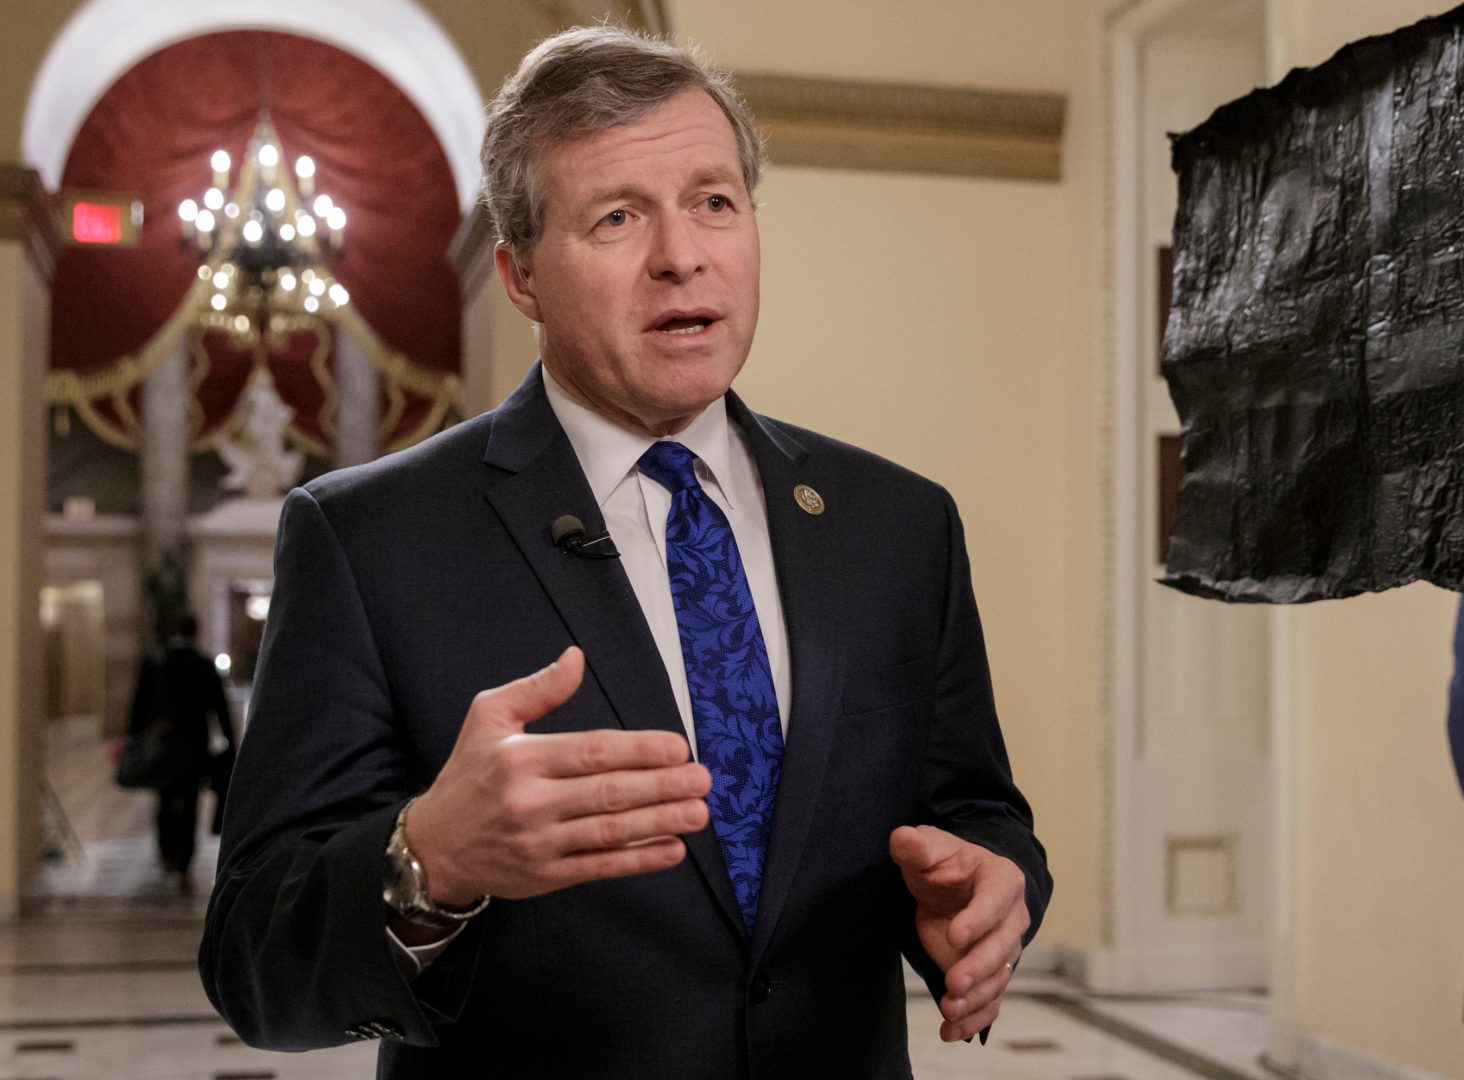 FILE - In this March 23, 2017, file photo, Rep. Charlie Dent, R-Pa., speaks on Capitol Hill in Washington. Dent resigned from Congress in 2018.